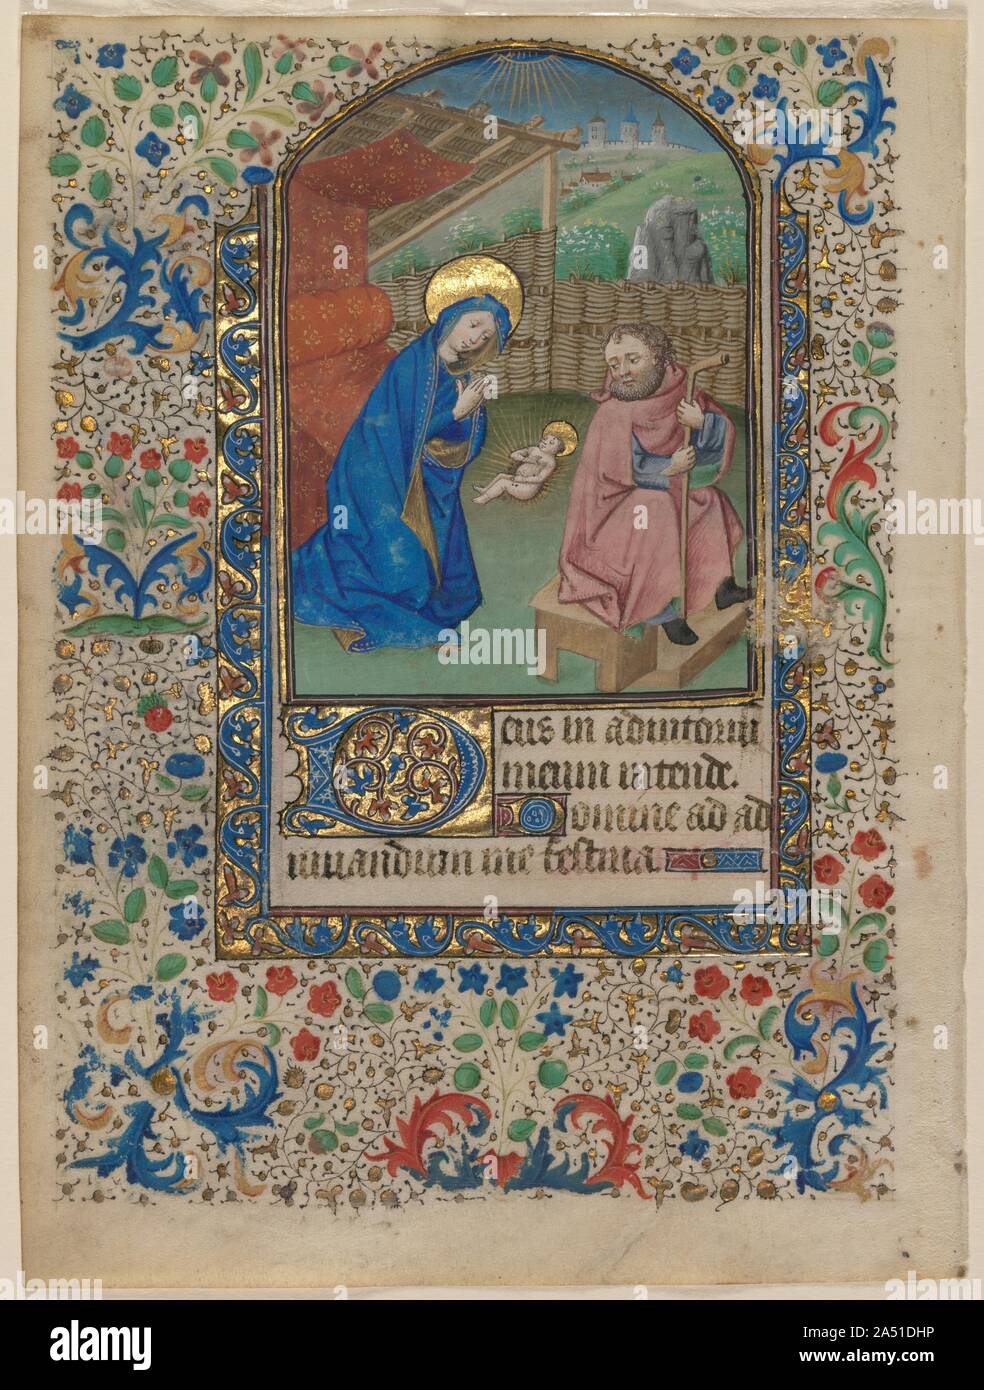 Leaf from a Book of Hours: The Nativity (recto), c. 1430. Representing God's entry into the world, the Nativity remains one of medieval painting's most poignant Christian images. In the Gospels, only Matthew and Luke directly described this event. Perhaps the brevity and absence of detail in these texts allowed artists to devote so much creativity to amplifying the Christmas story. This miniature's simplicity makes it compelling. Only the three principals&#x2014;Mary, Joseph, and the newly born Christ Child&#x2014;appear in the scene. The Virgin kneels before an elegant canopied bed made sumpt Stock Photo